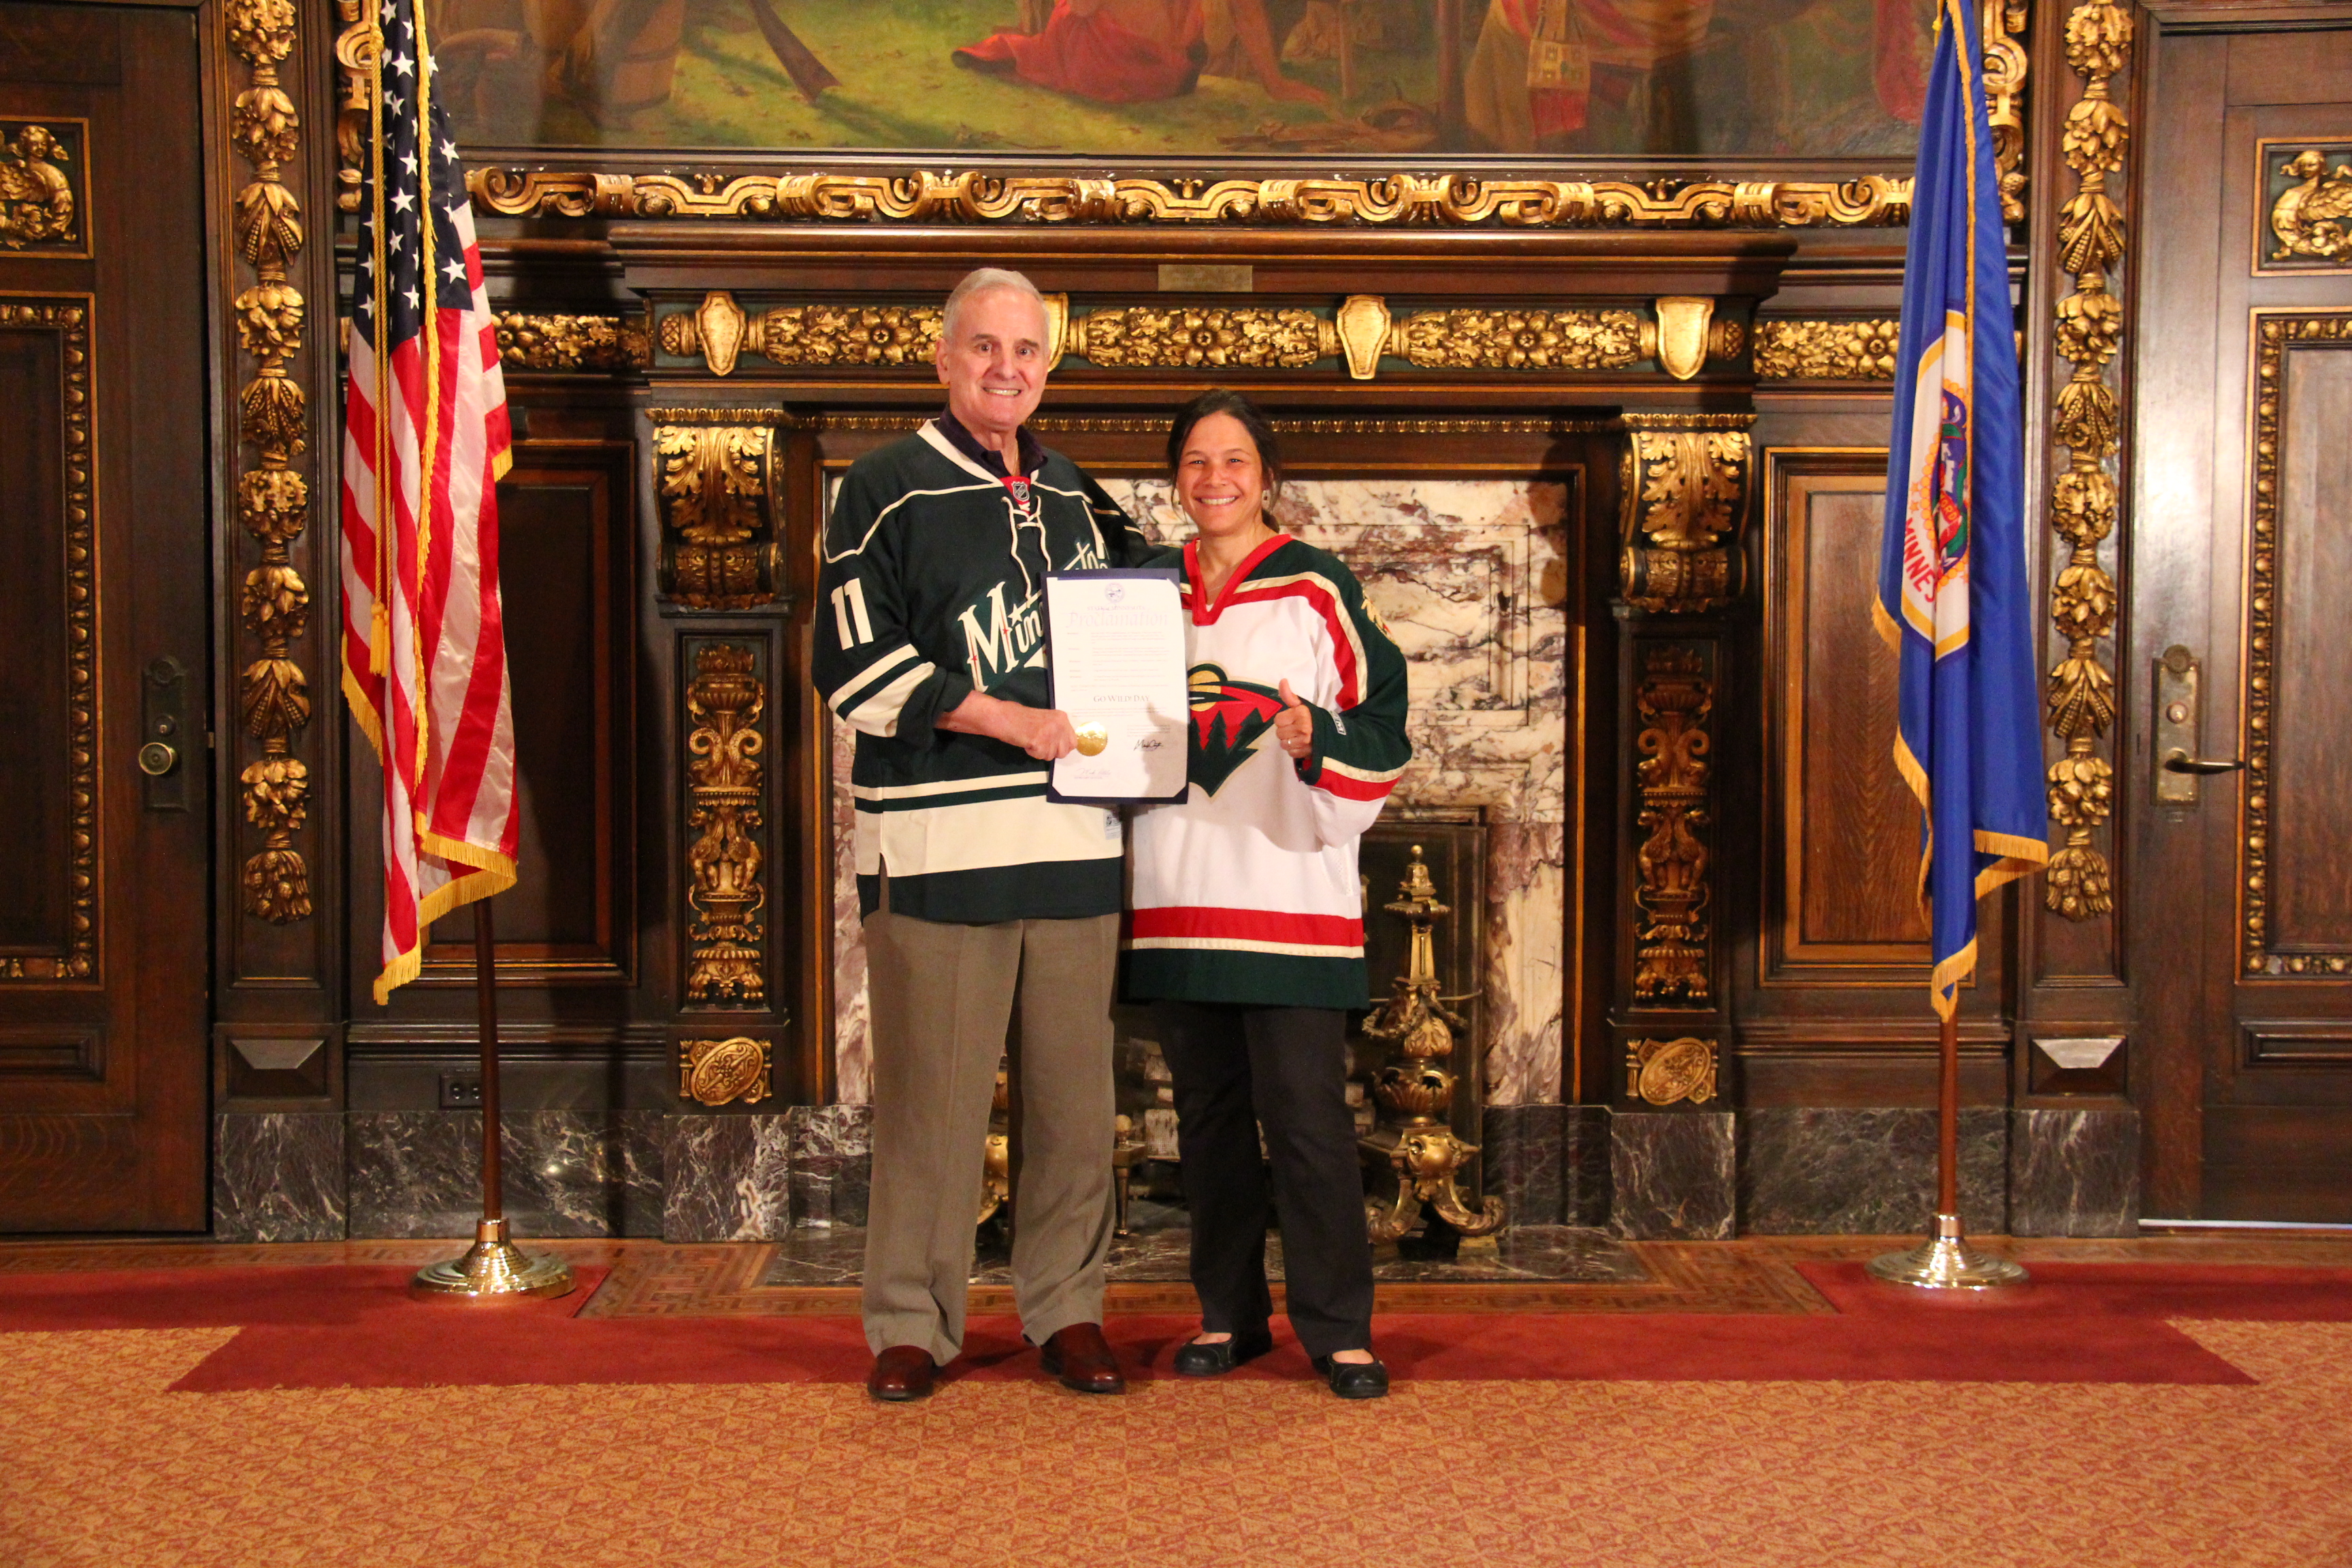 To show their support for the Wild, the Governor, who was an All-State high school goalie, and Department of Education Commissioner Cassellius, who still moonlights as a forward for the Penalty Box Hockey Team, wore their jerseys to the Capitol